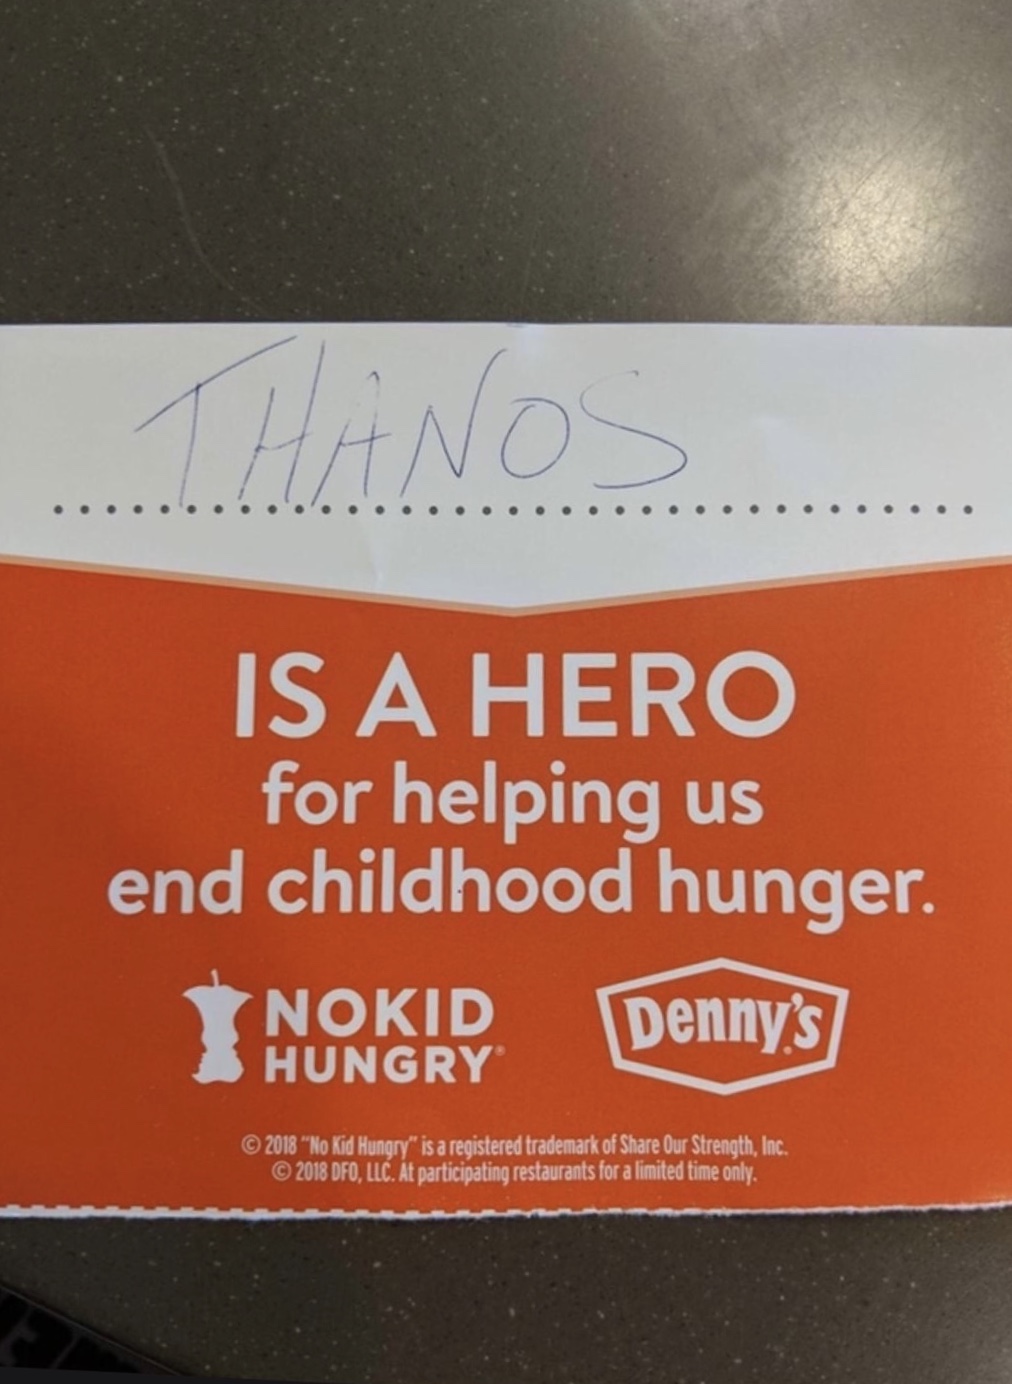 memes - orange - Is A Hero for helping us end childhood hunger. Nokid Denny's Hungry 2018 "No Kid Hungry" is a registered trademark of Our Strength, Inc. 2018 Dfo, Llc. At participating restaurants for a limited time only.